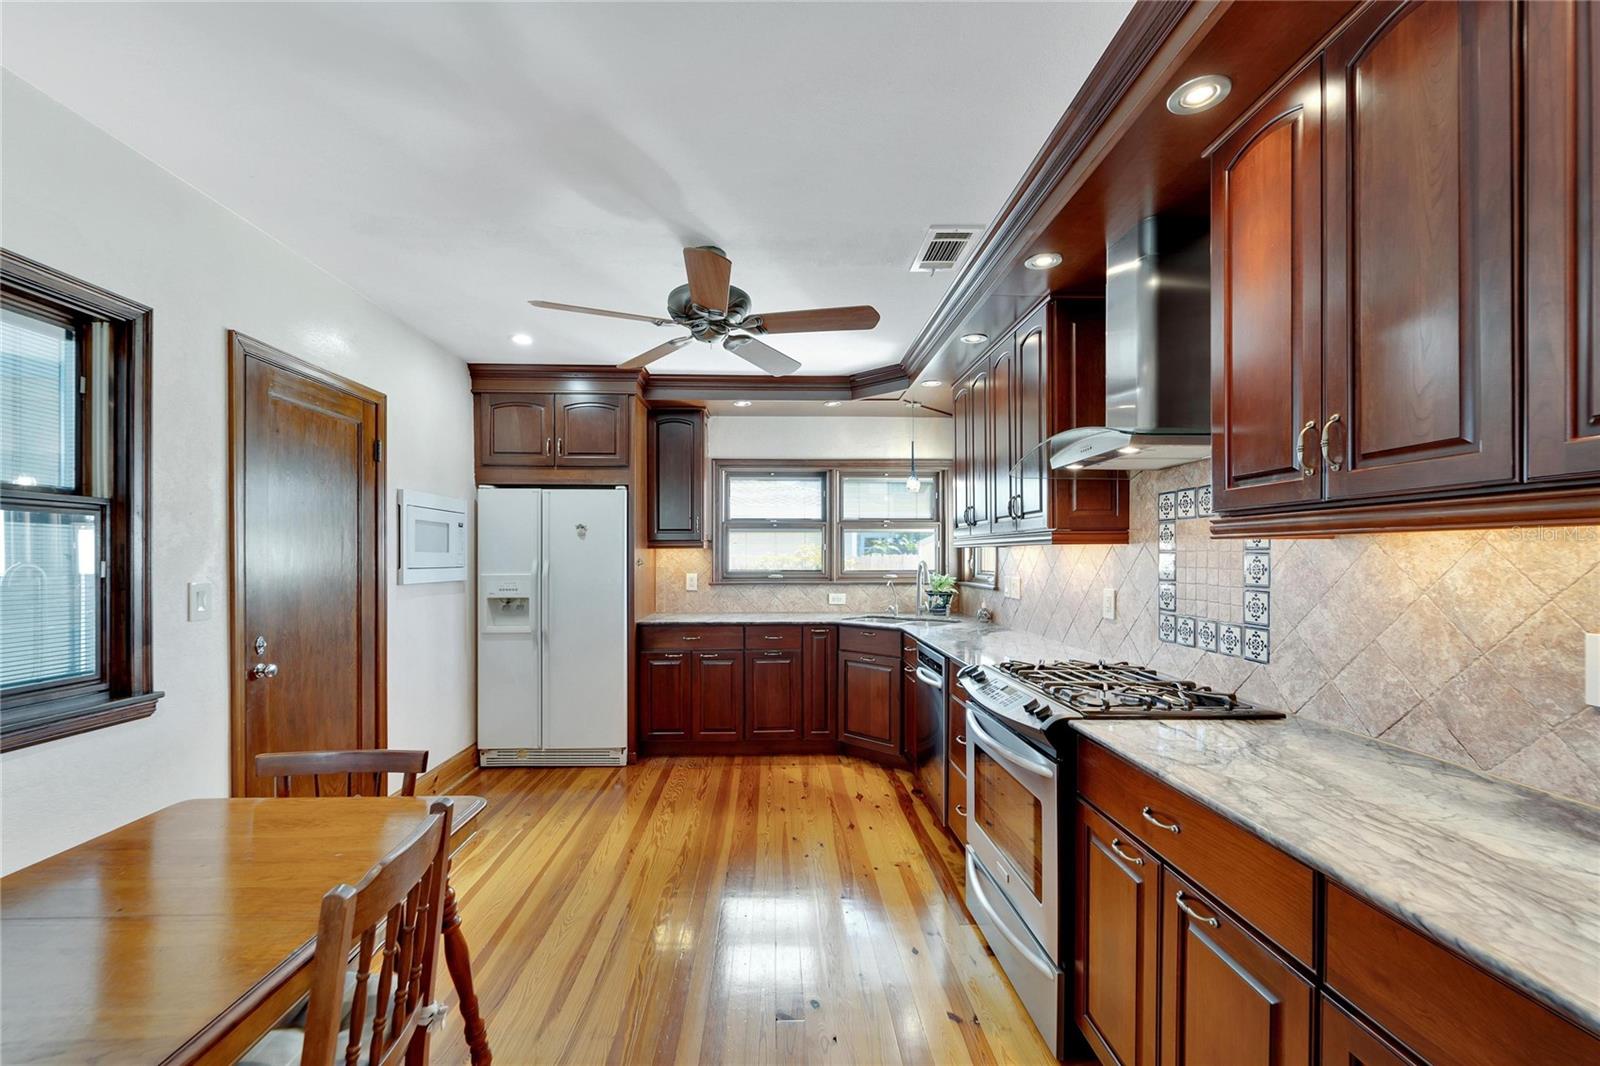 Beautiful custom kitchen with hard wood cabinetry, stone countertops and many special features..